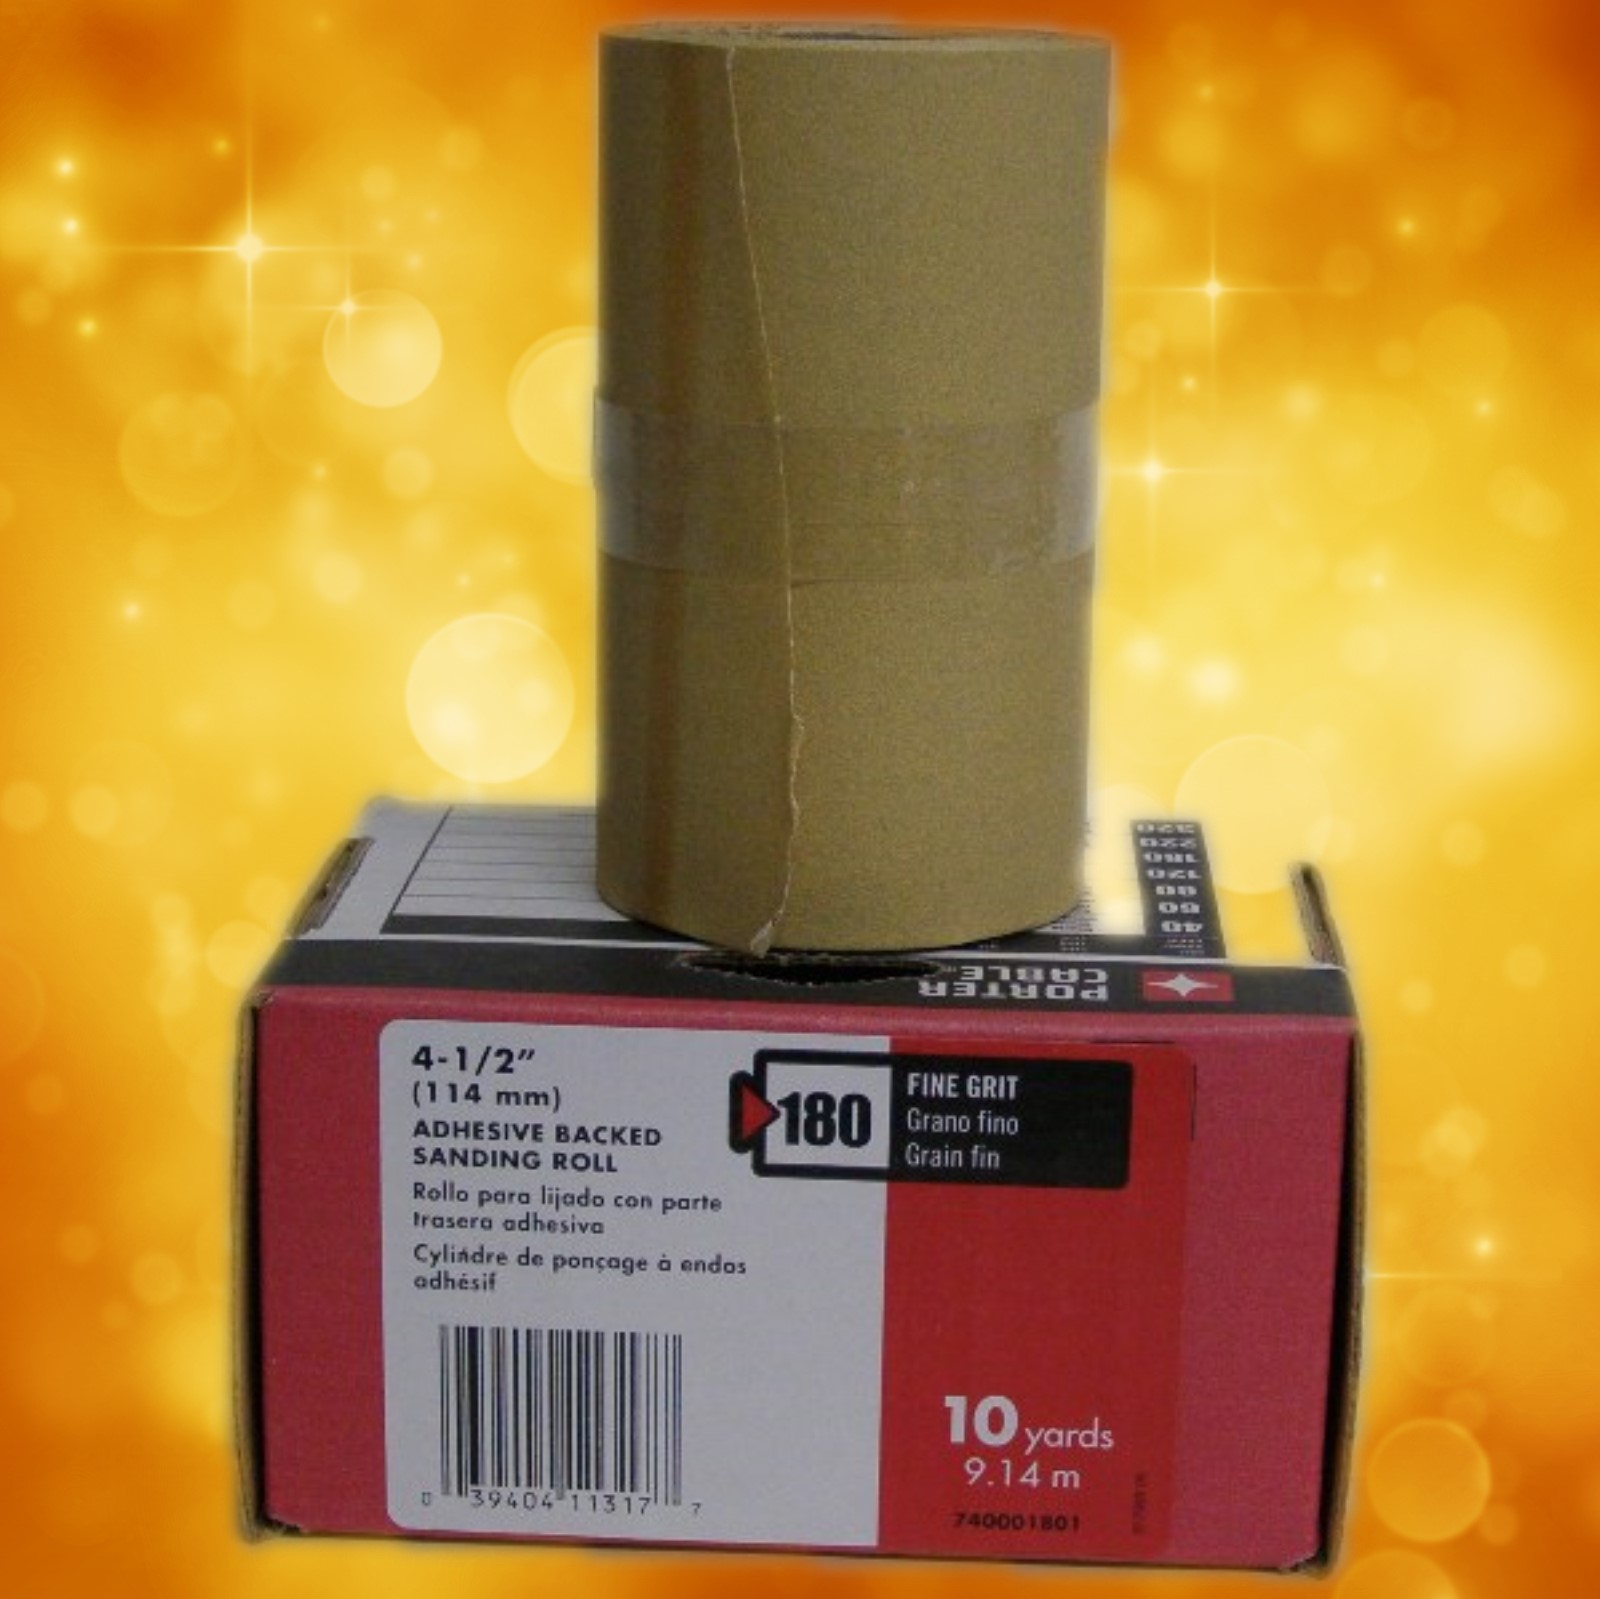 Porter-Cable 4-1/2" x 10 Yard, Adhesive-Backed Sanding Roll - 180 Grit 740001801